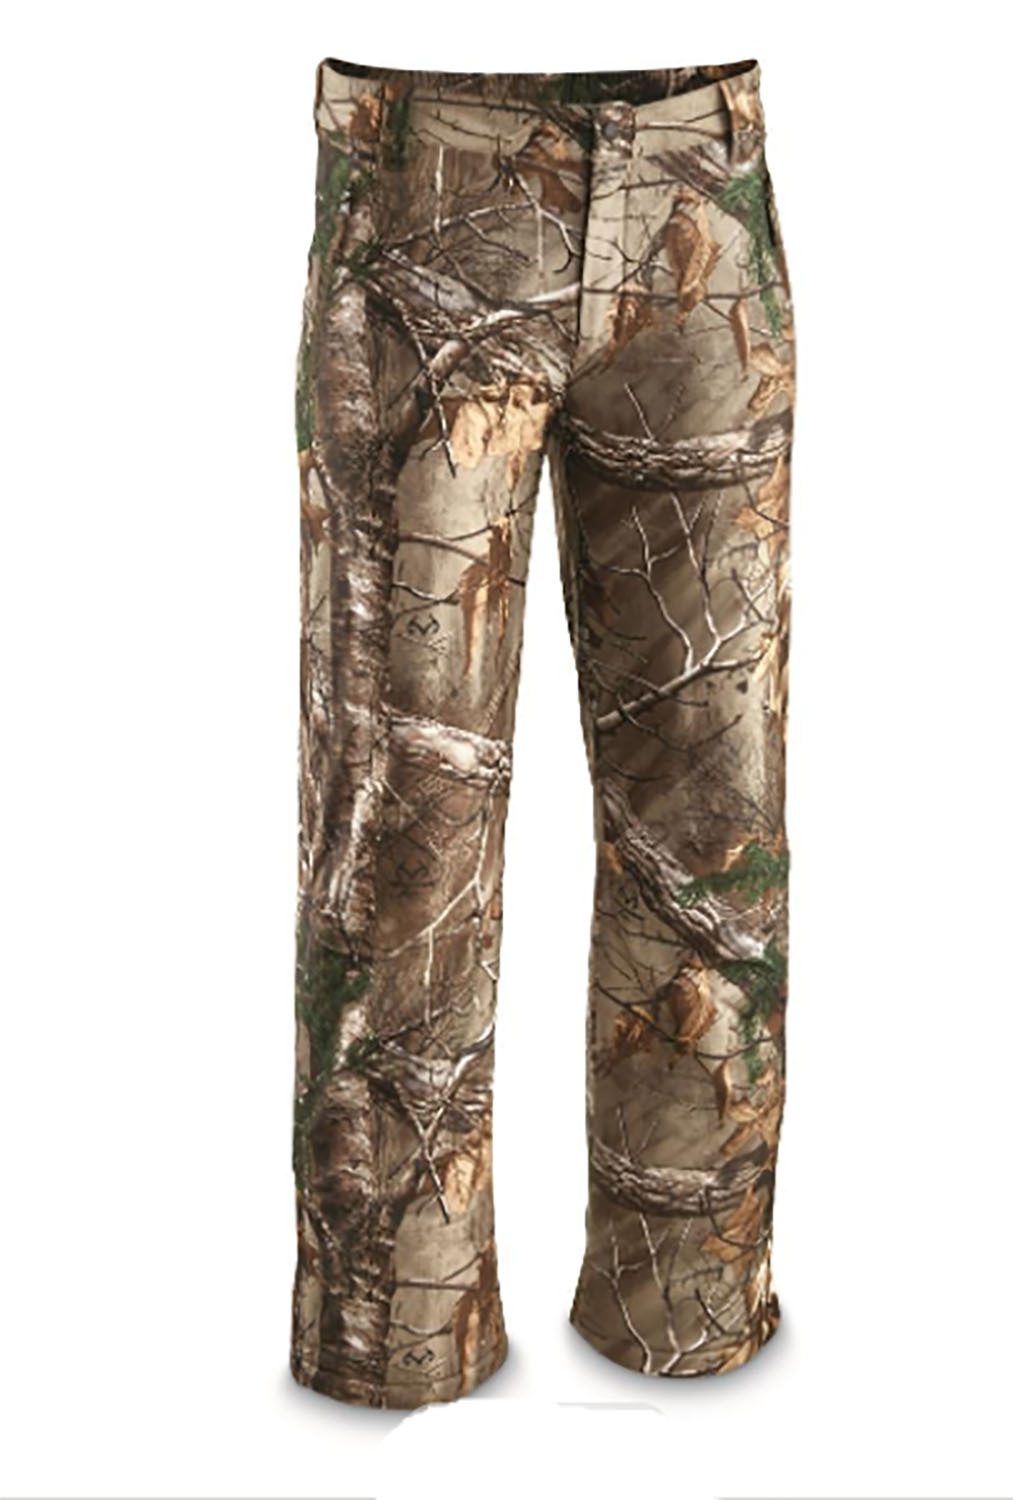 NEW Ladies Realtree Xtra Hunting Cargo Pants Sizes S M L XL XXL Camouflage Women 